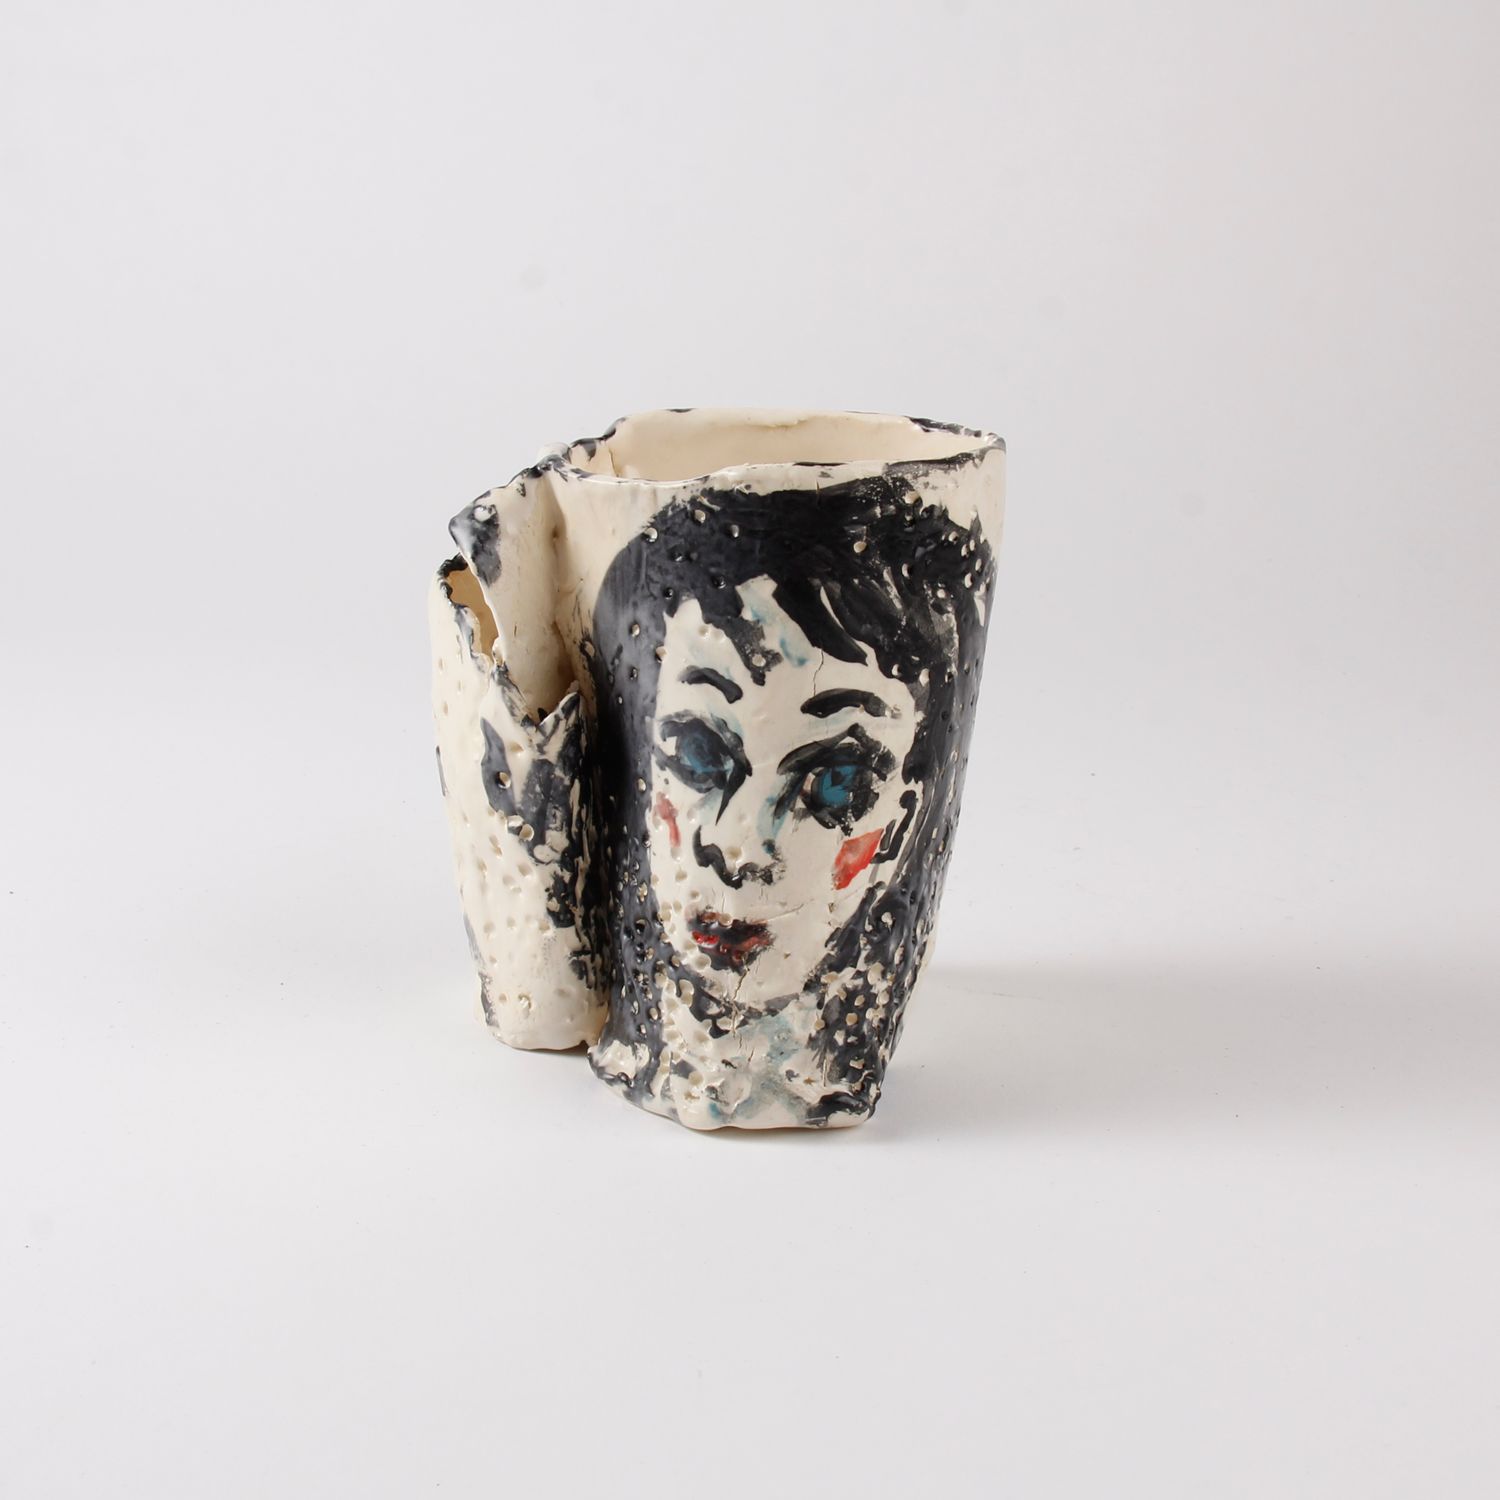 Patricia Lazar: Curly Handle Mug with Lady Product Image 1 of 3